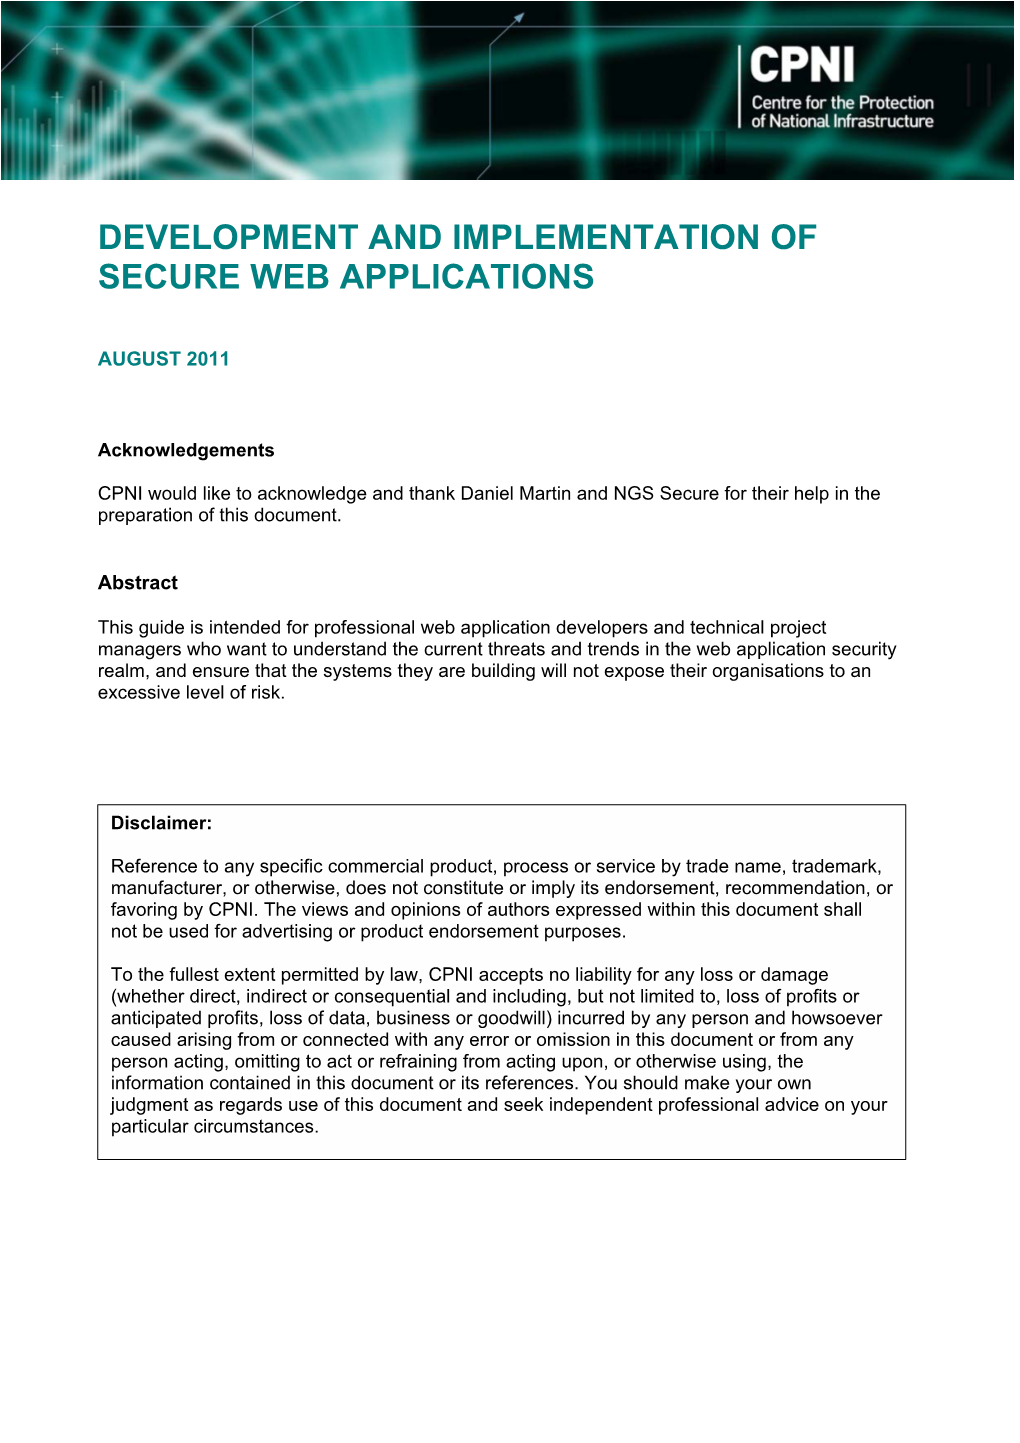 Development and Implementation of Secure Web Applications